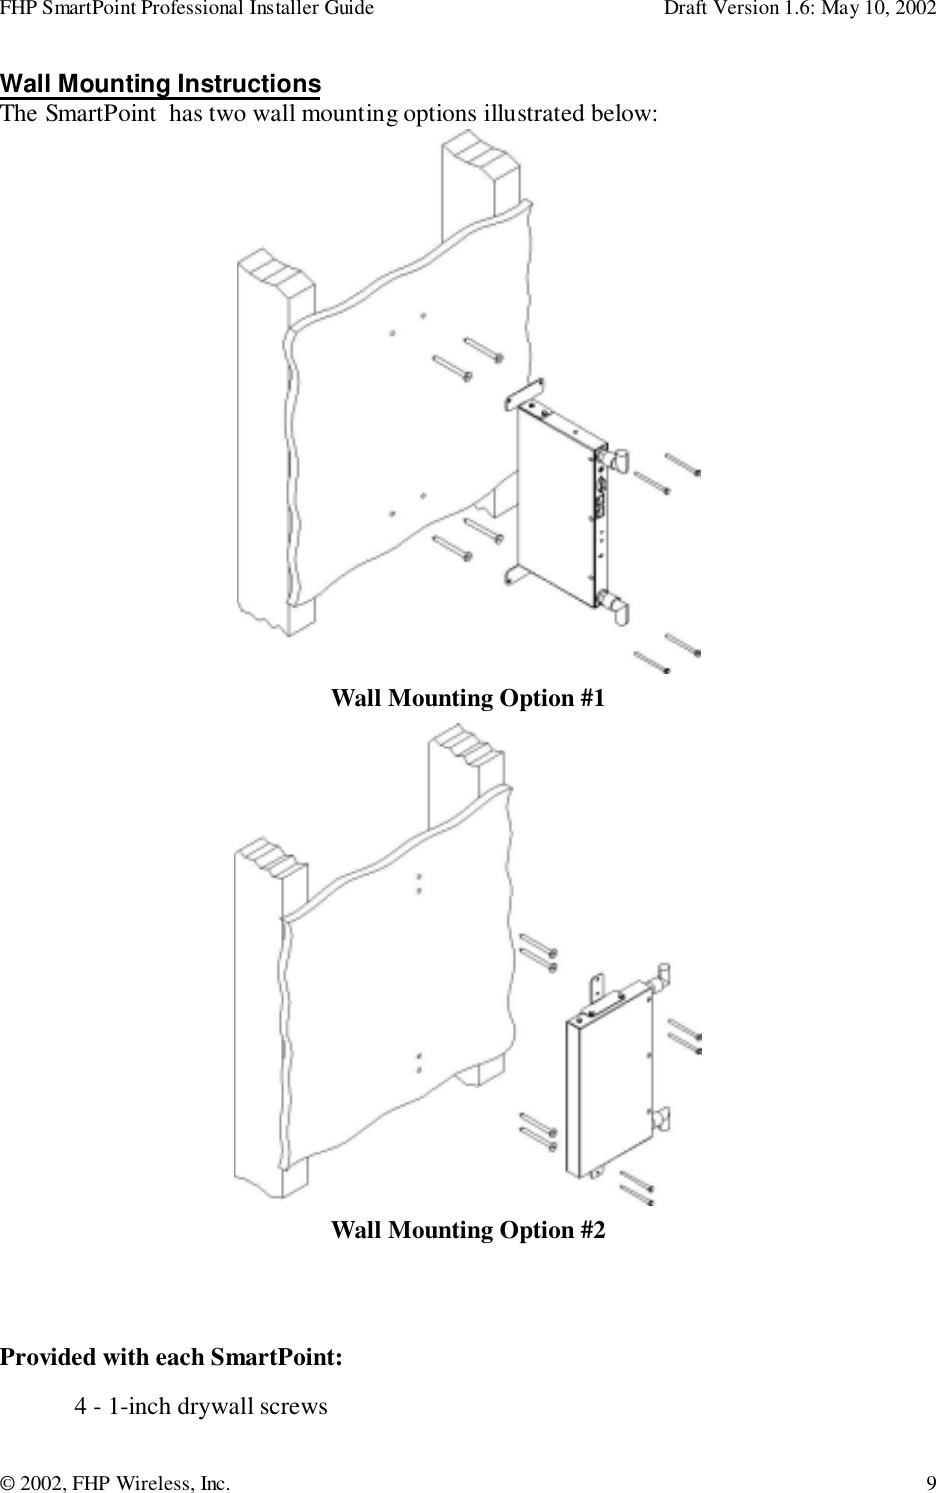 FHP SmartPoint Professional Installer Guide Draft Version 1.6: May 10, 2002© 2002, FHP Wireless, Inc. 9Wall Mounting InstructionsThe SmartPoint  has two wall mounting options illustrated below:Wall Mounting Option #1Wall Mounting Option #2Provided with each SmartPoint:4 - 1-inch drywall screws